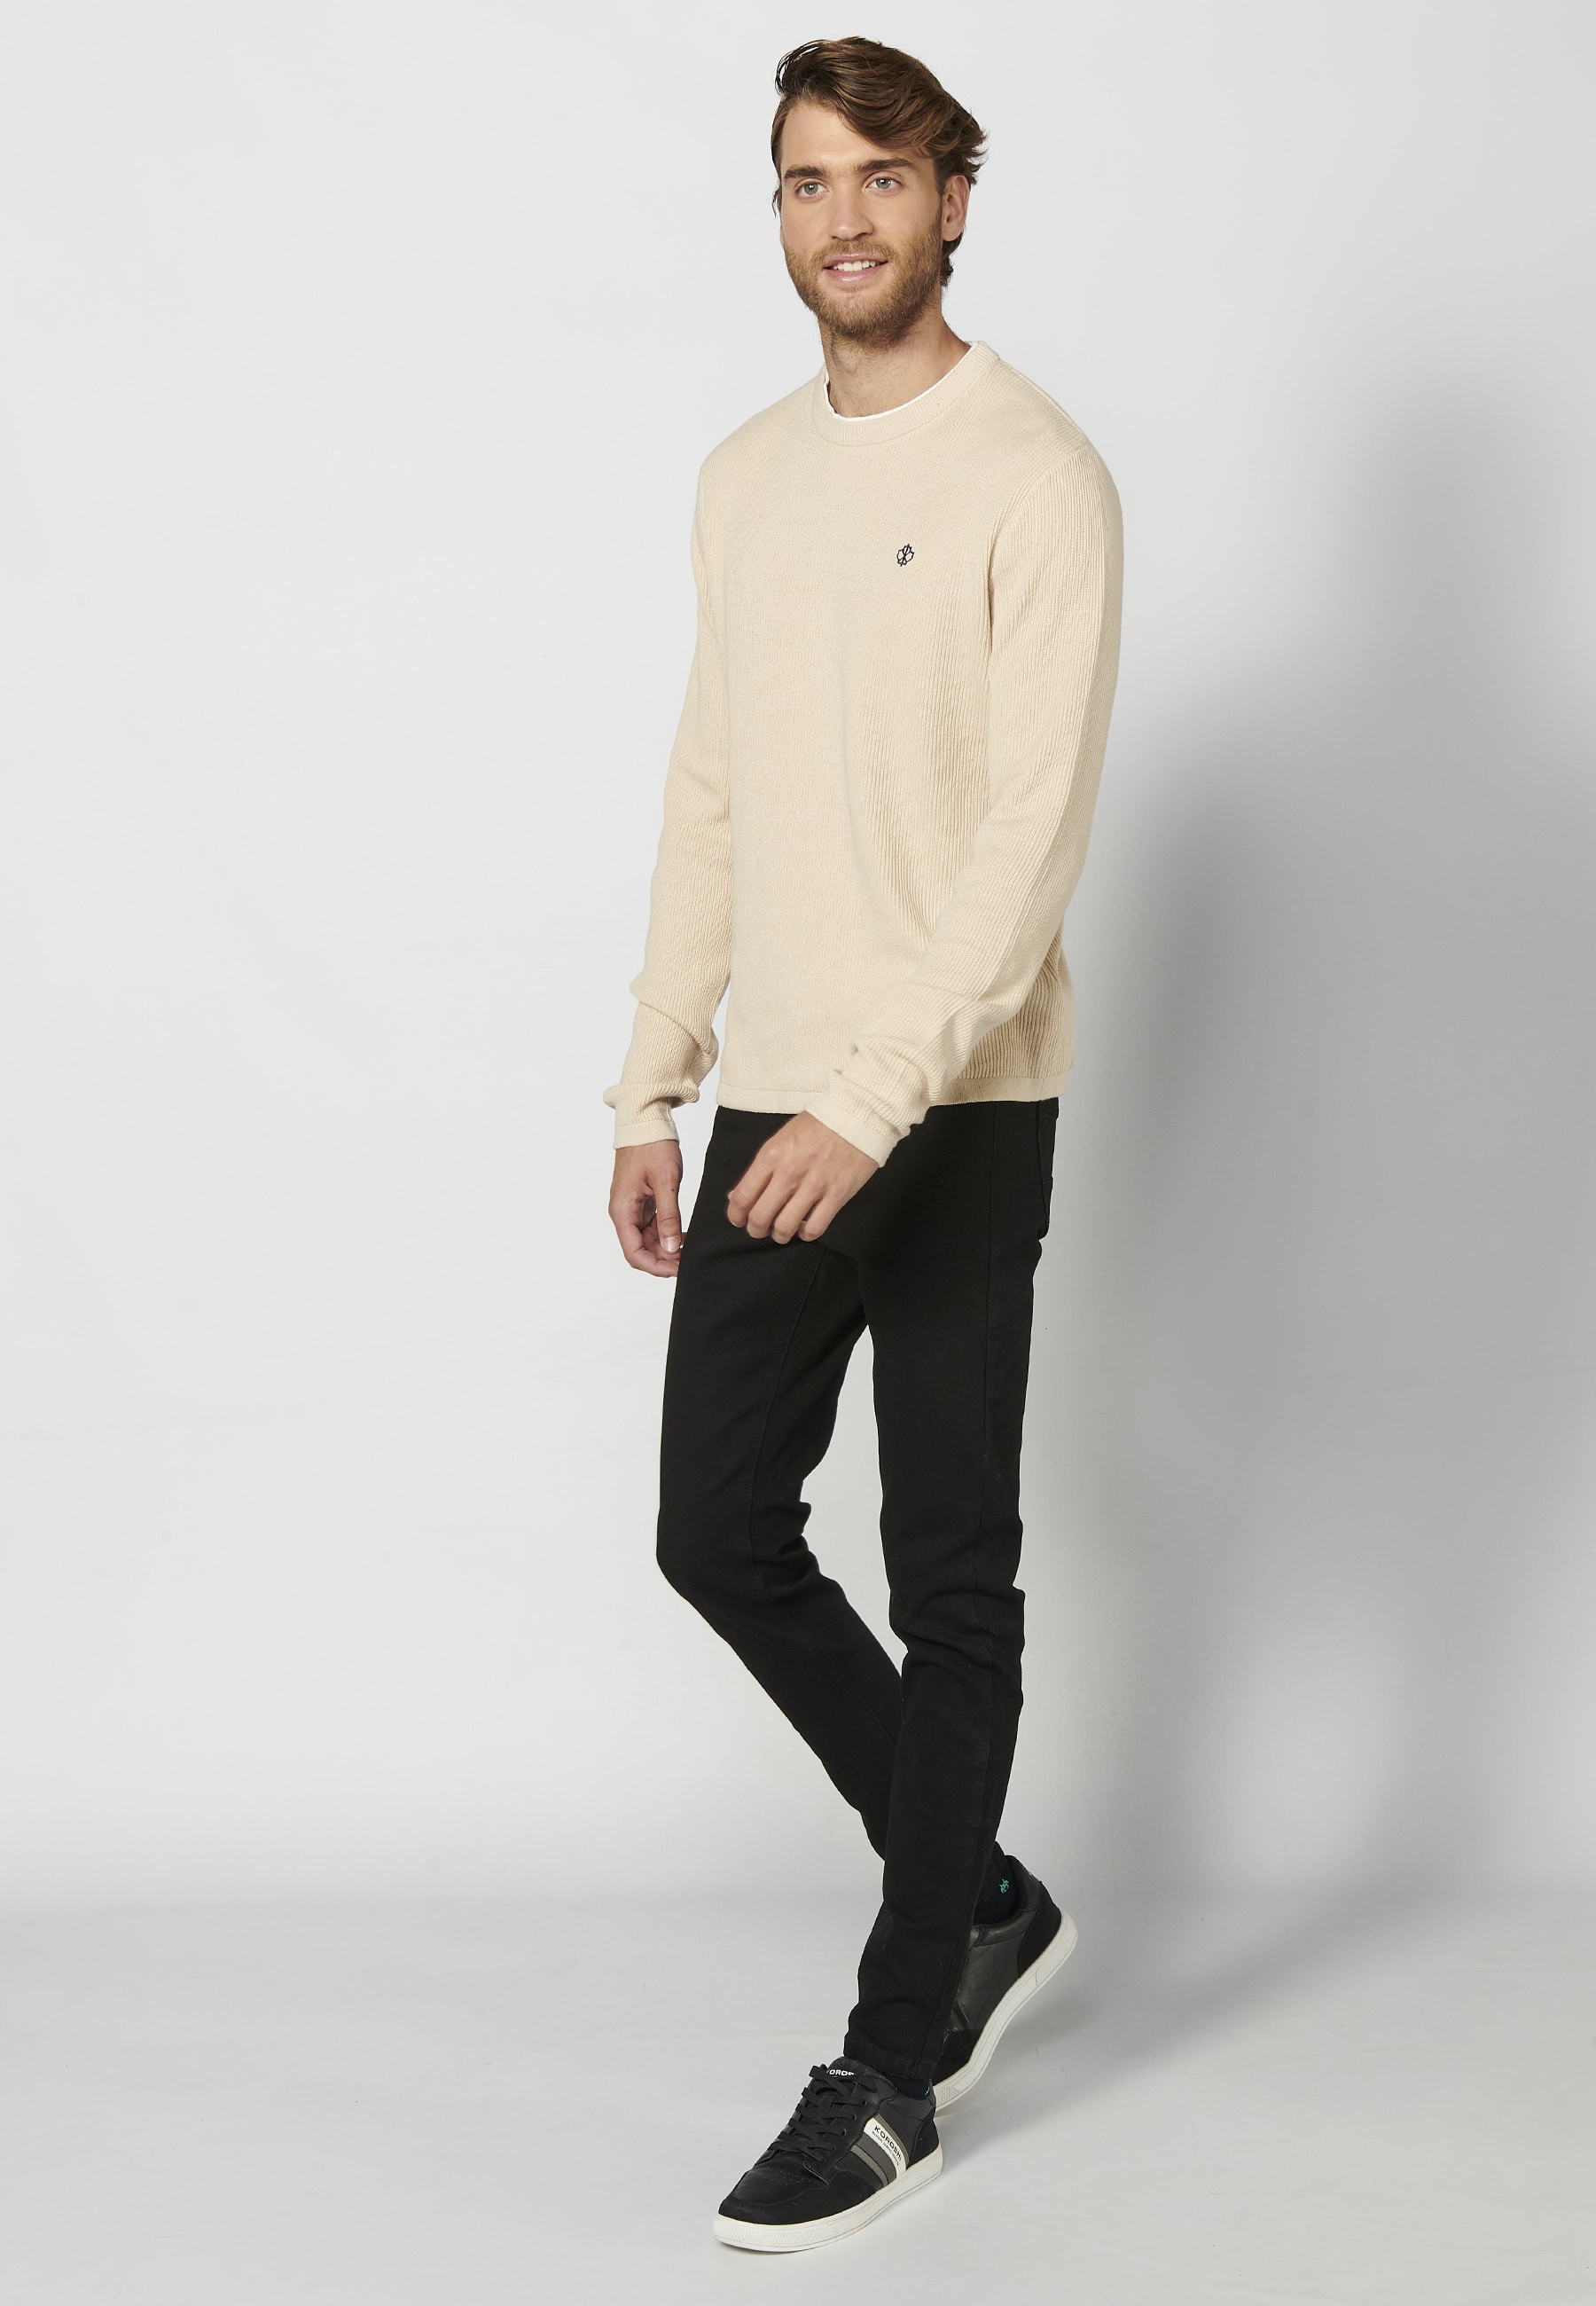 Long-sleeved cotton tricot sweater with embroidered detail in Cream color for Men 1